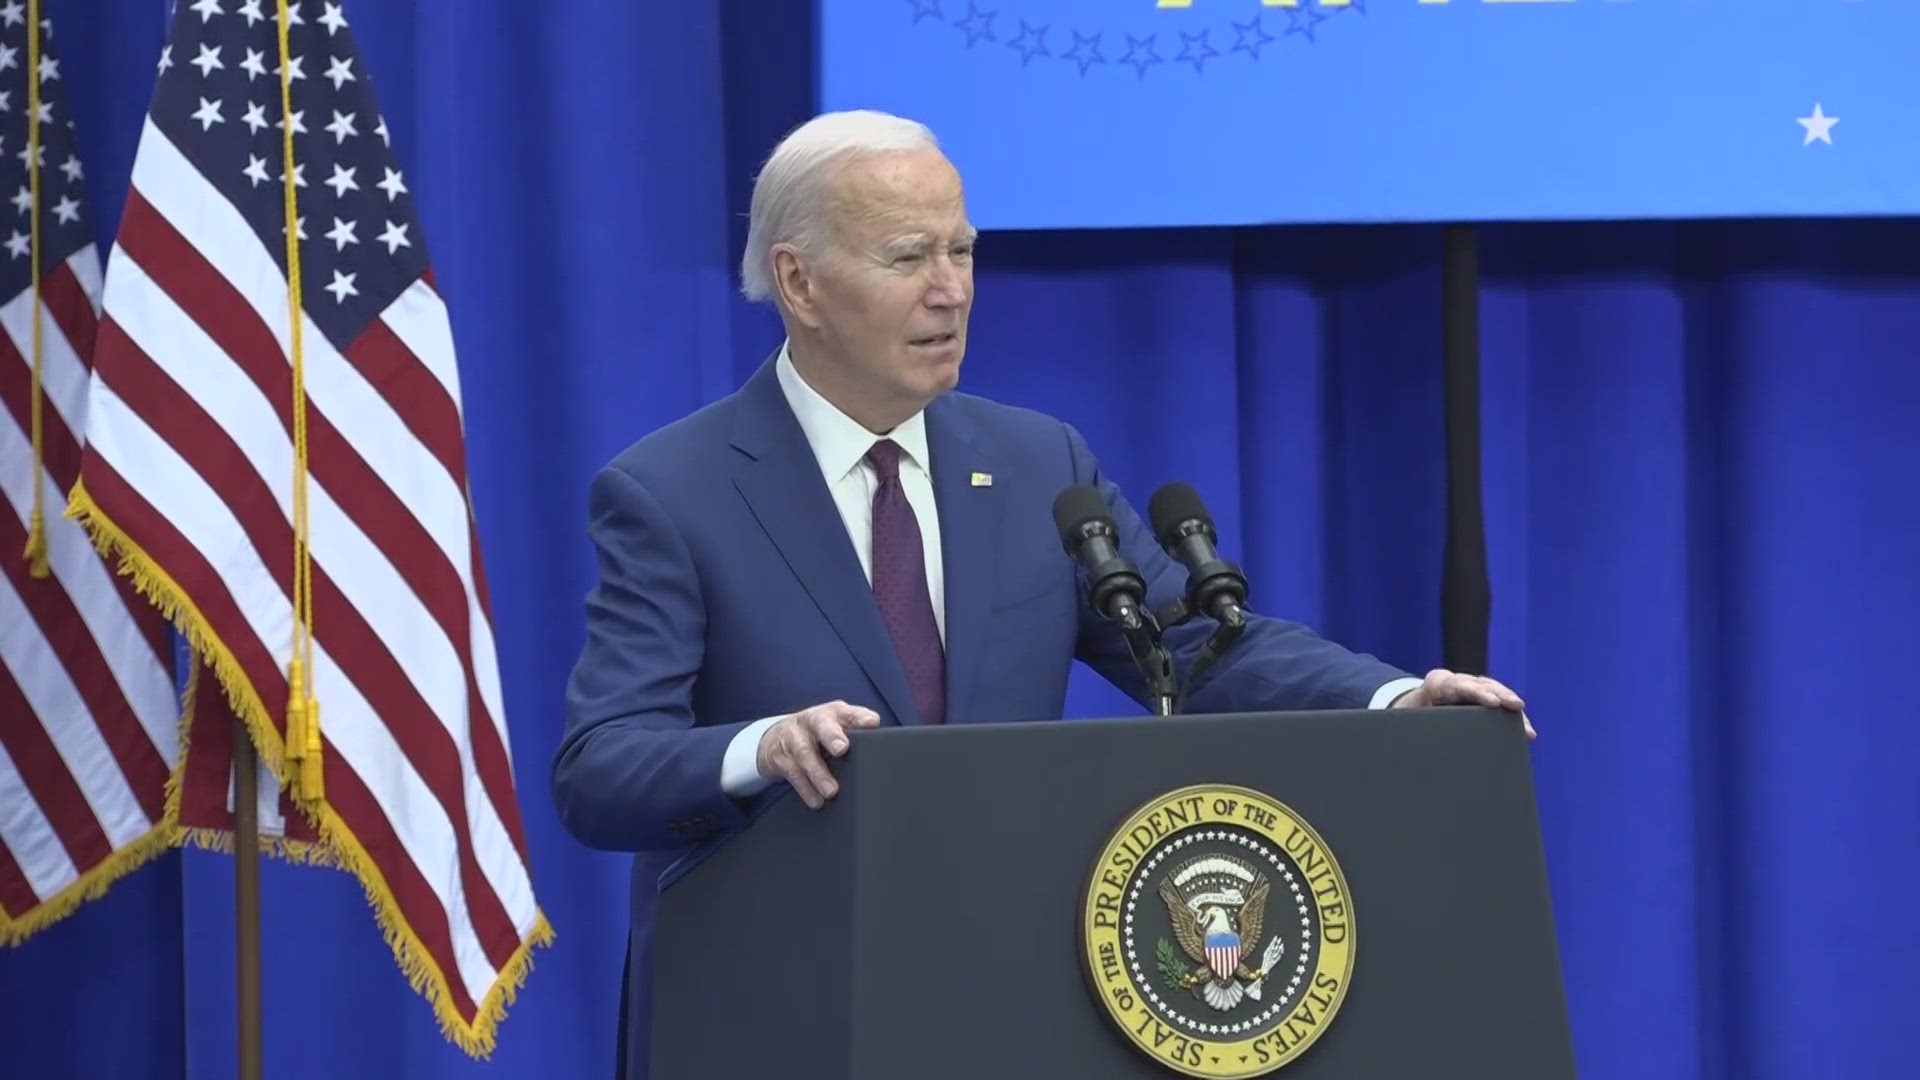 Biden paid an official presidential visit to The Granite State, but there's no doubt he was also doing a little bit of campaigning.